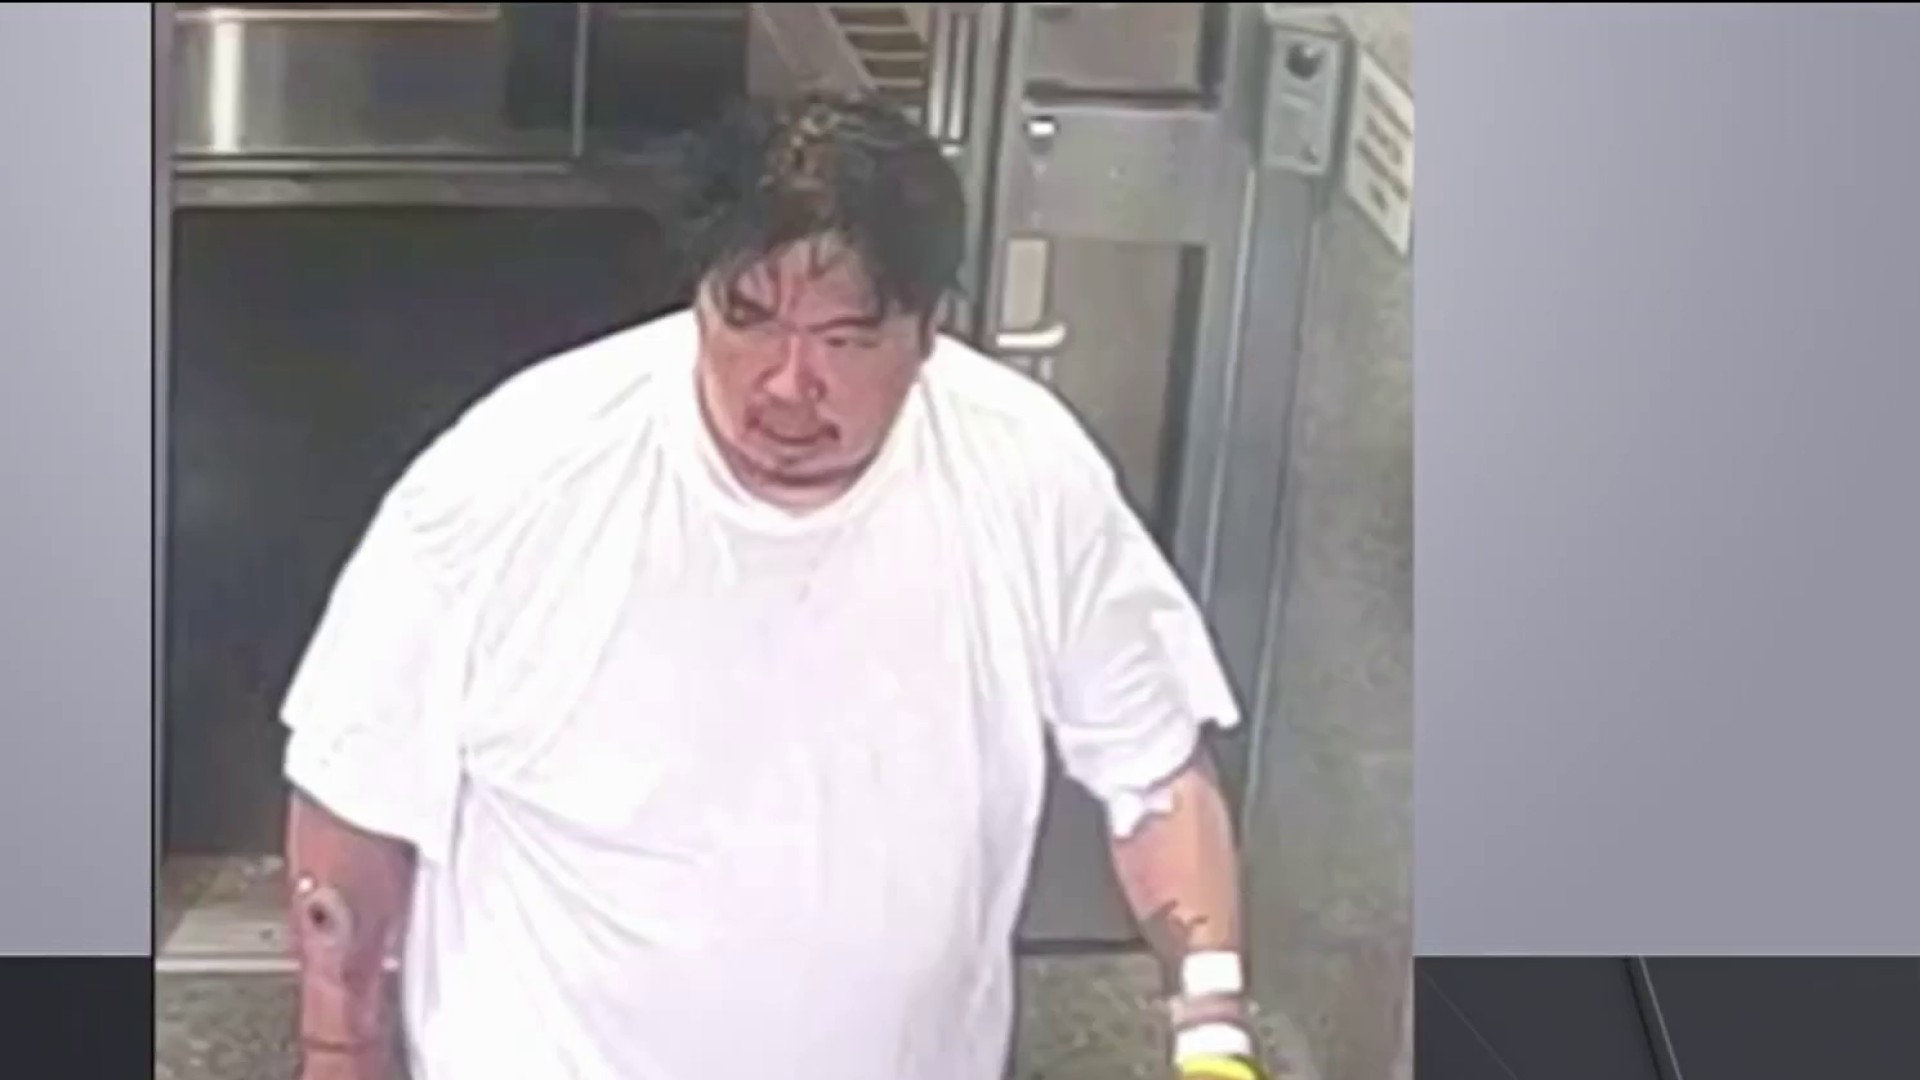 Yenchun Chen New York City Inmate Caught After Escaping from Hospital?